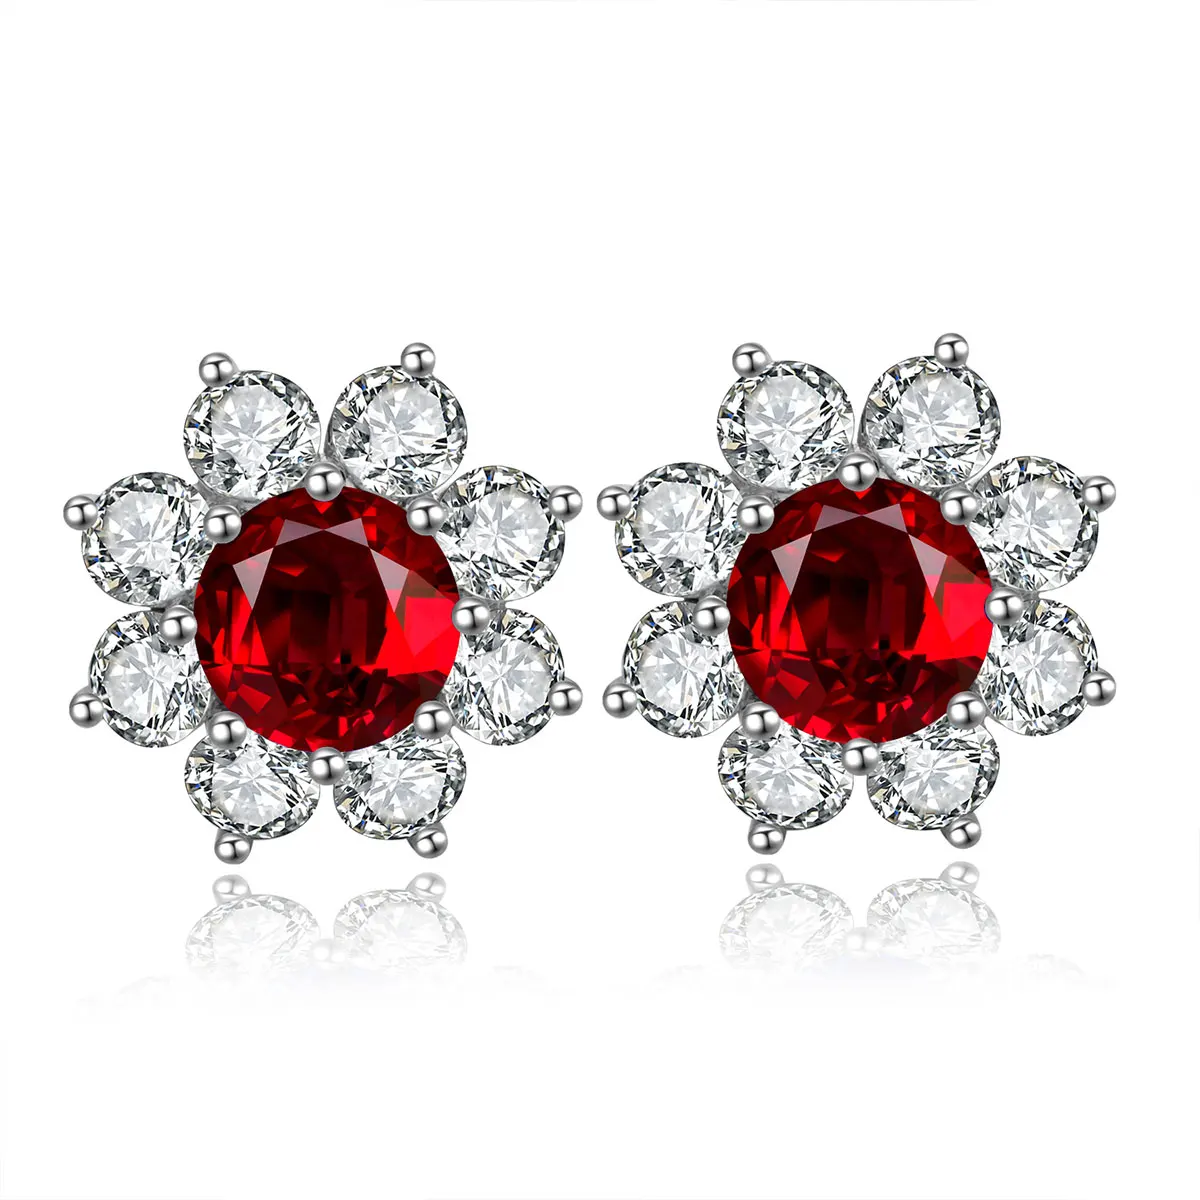 

Anster jewelry 9k gold lab grown ruby stud high quality earrings moissanite side stones for women wholesale, Red